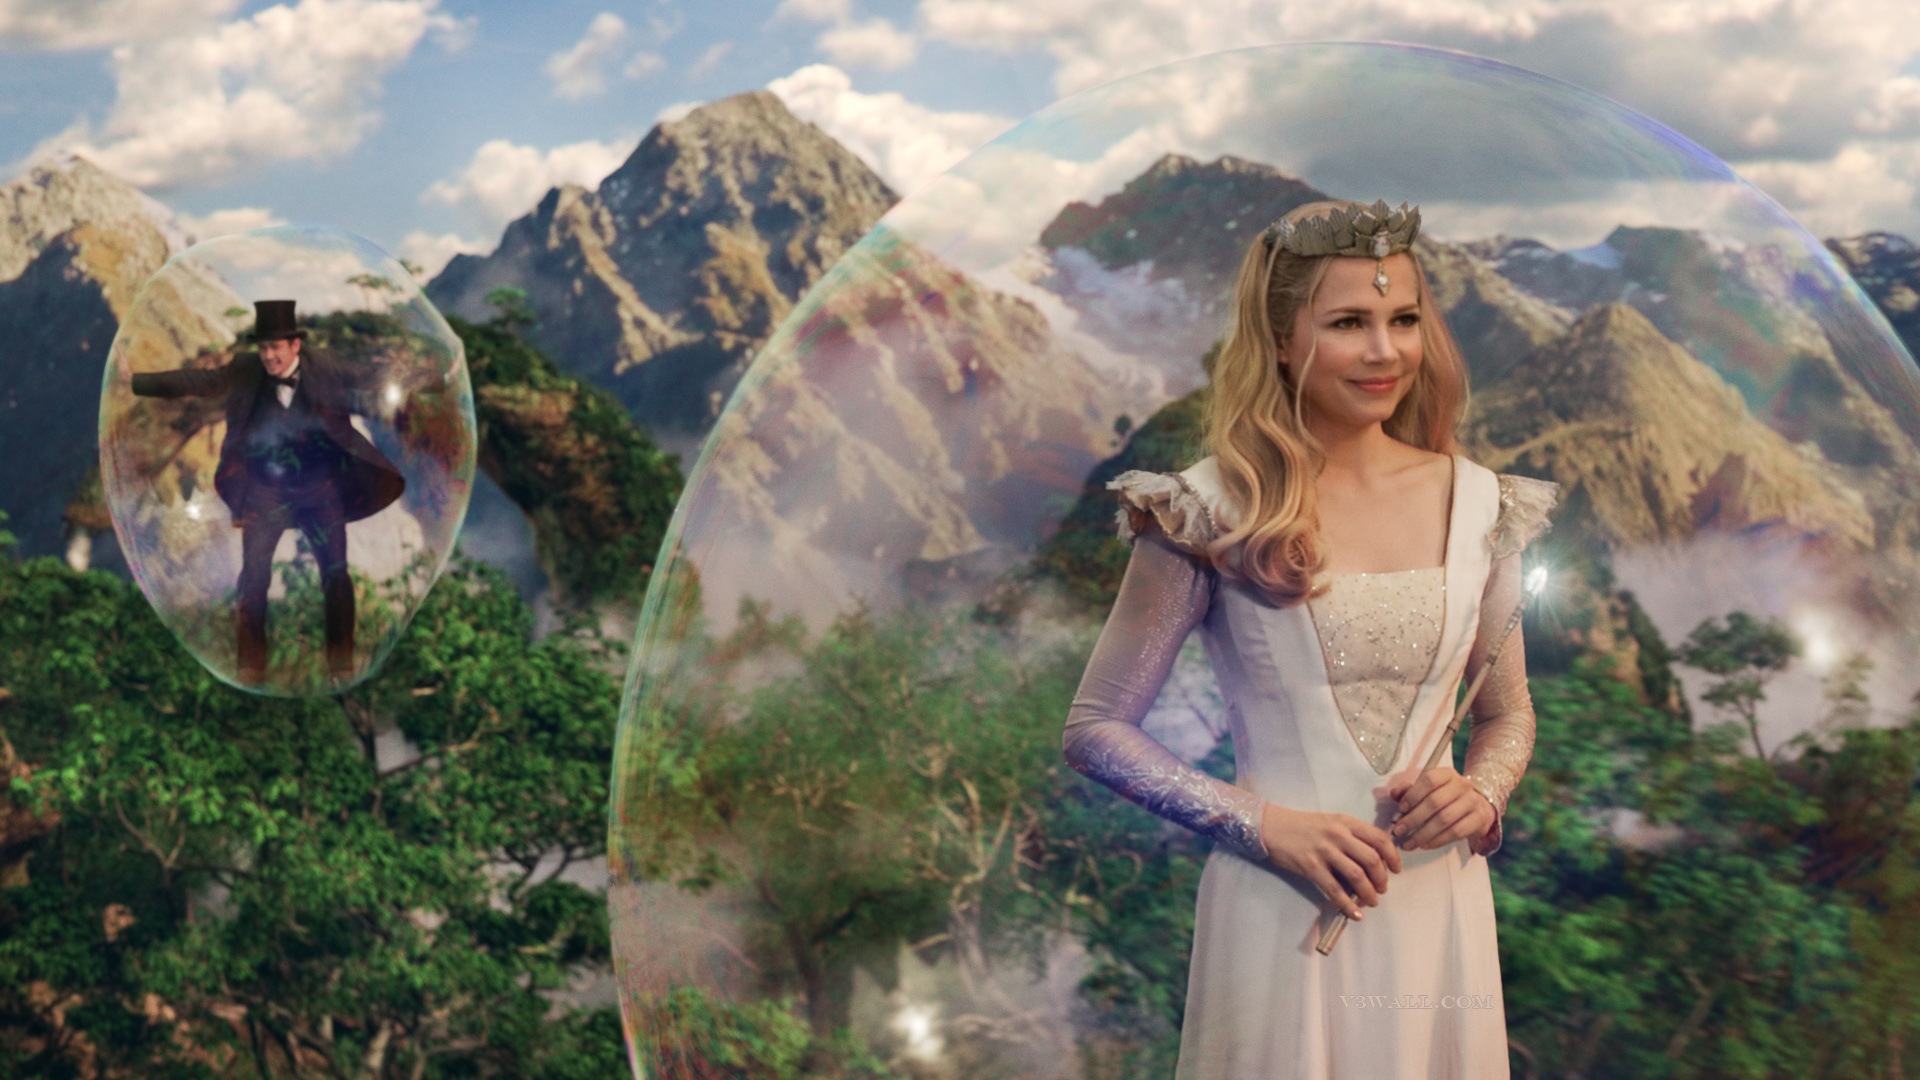 Oz The Great and Powerful 2013 HD wallpapers #17 - 1920x1080